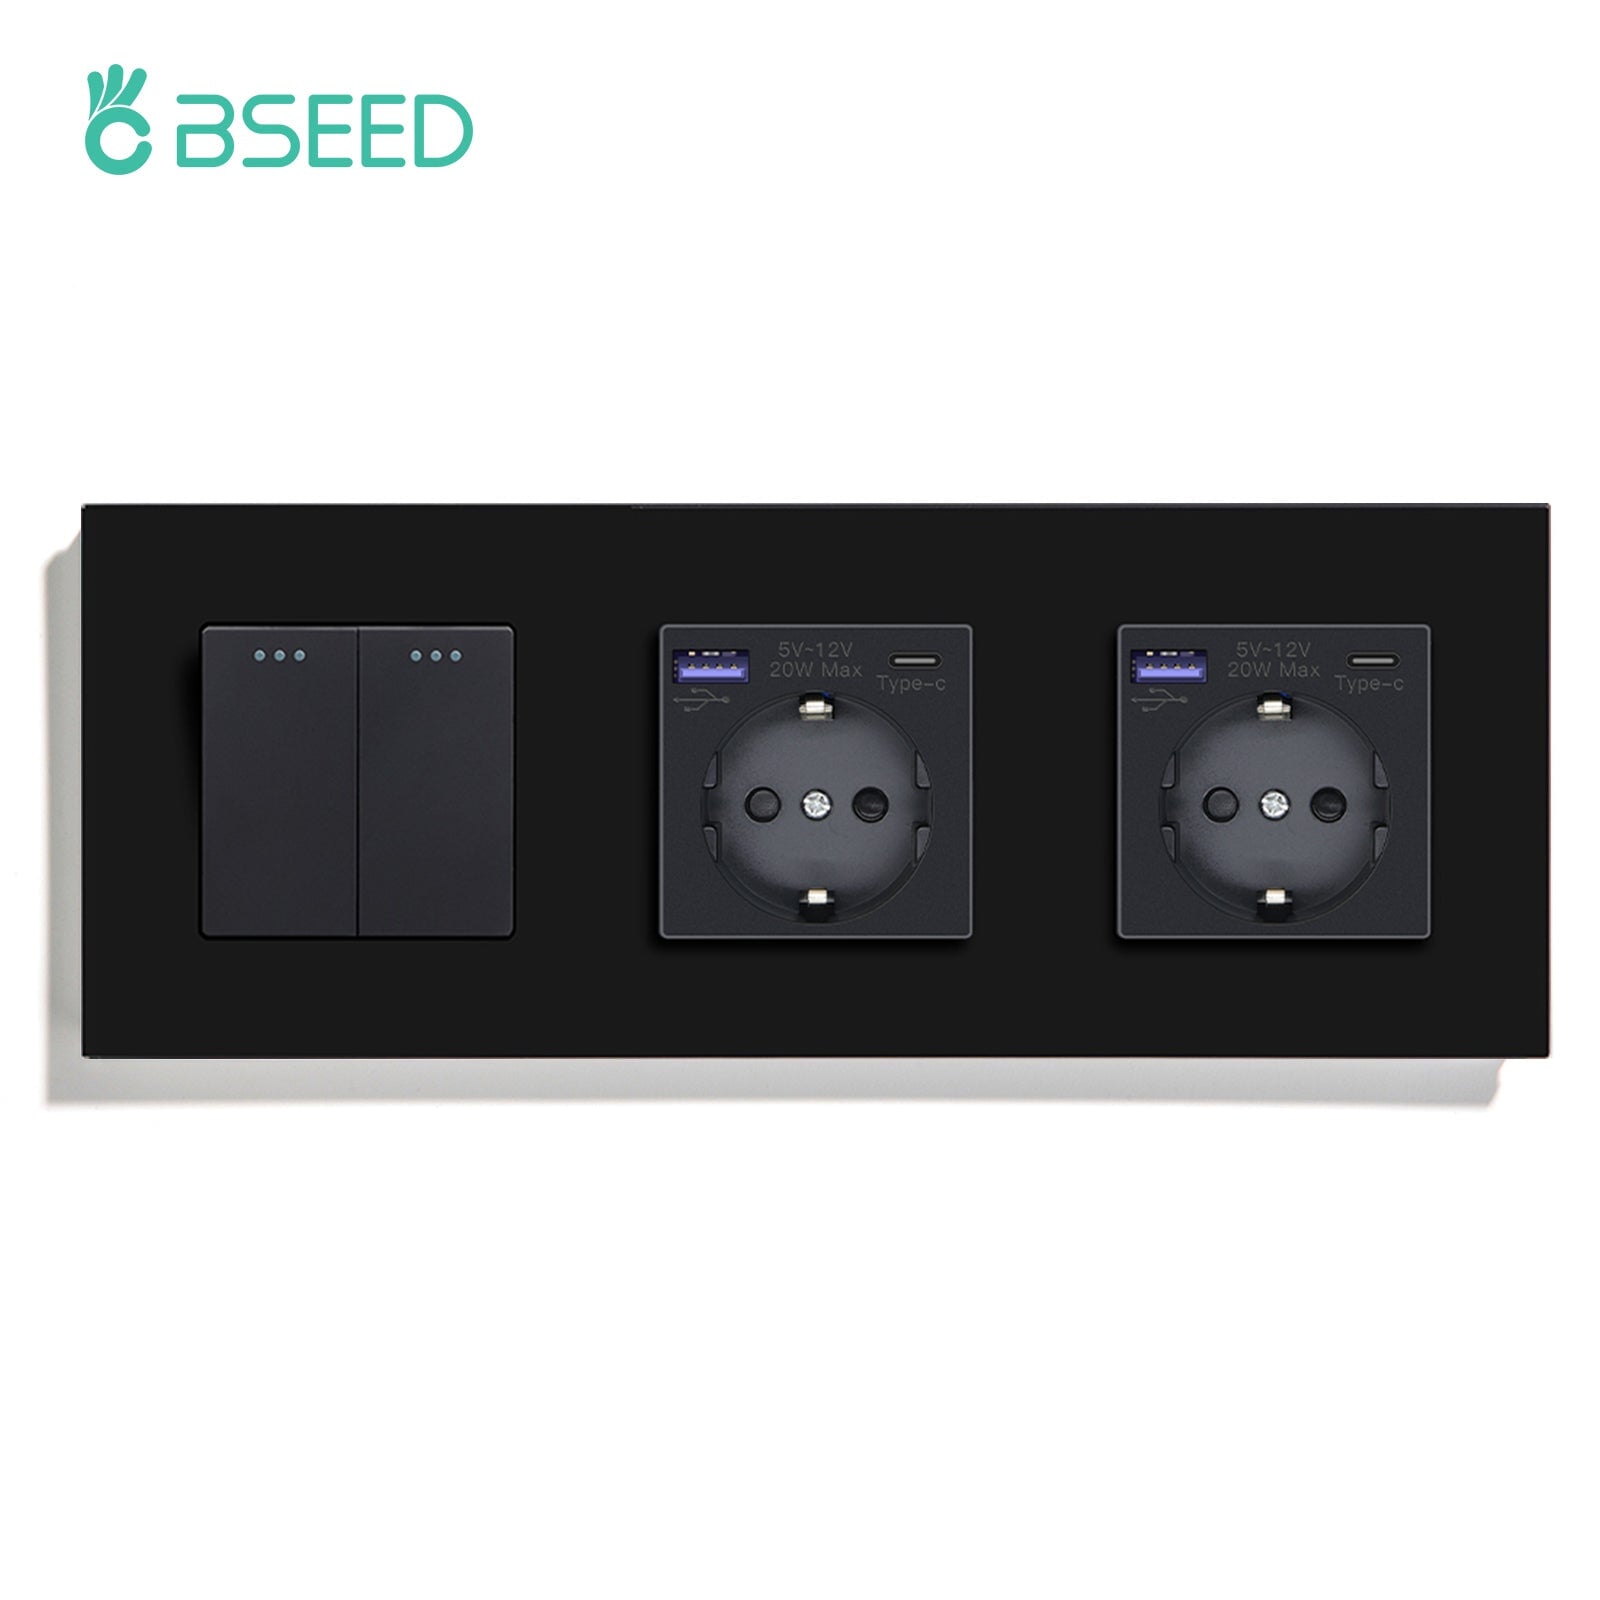 BSEED 1/2/3 Gang 1/2 Way Light Switch With Normal Eu Socket With fast charge USB-c Power Outlets & Sockets Bseedswitch Black 2Gang 1Way